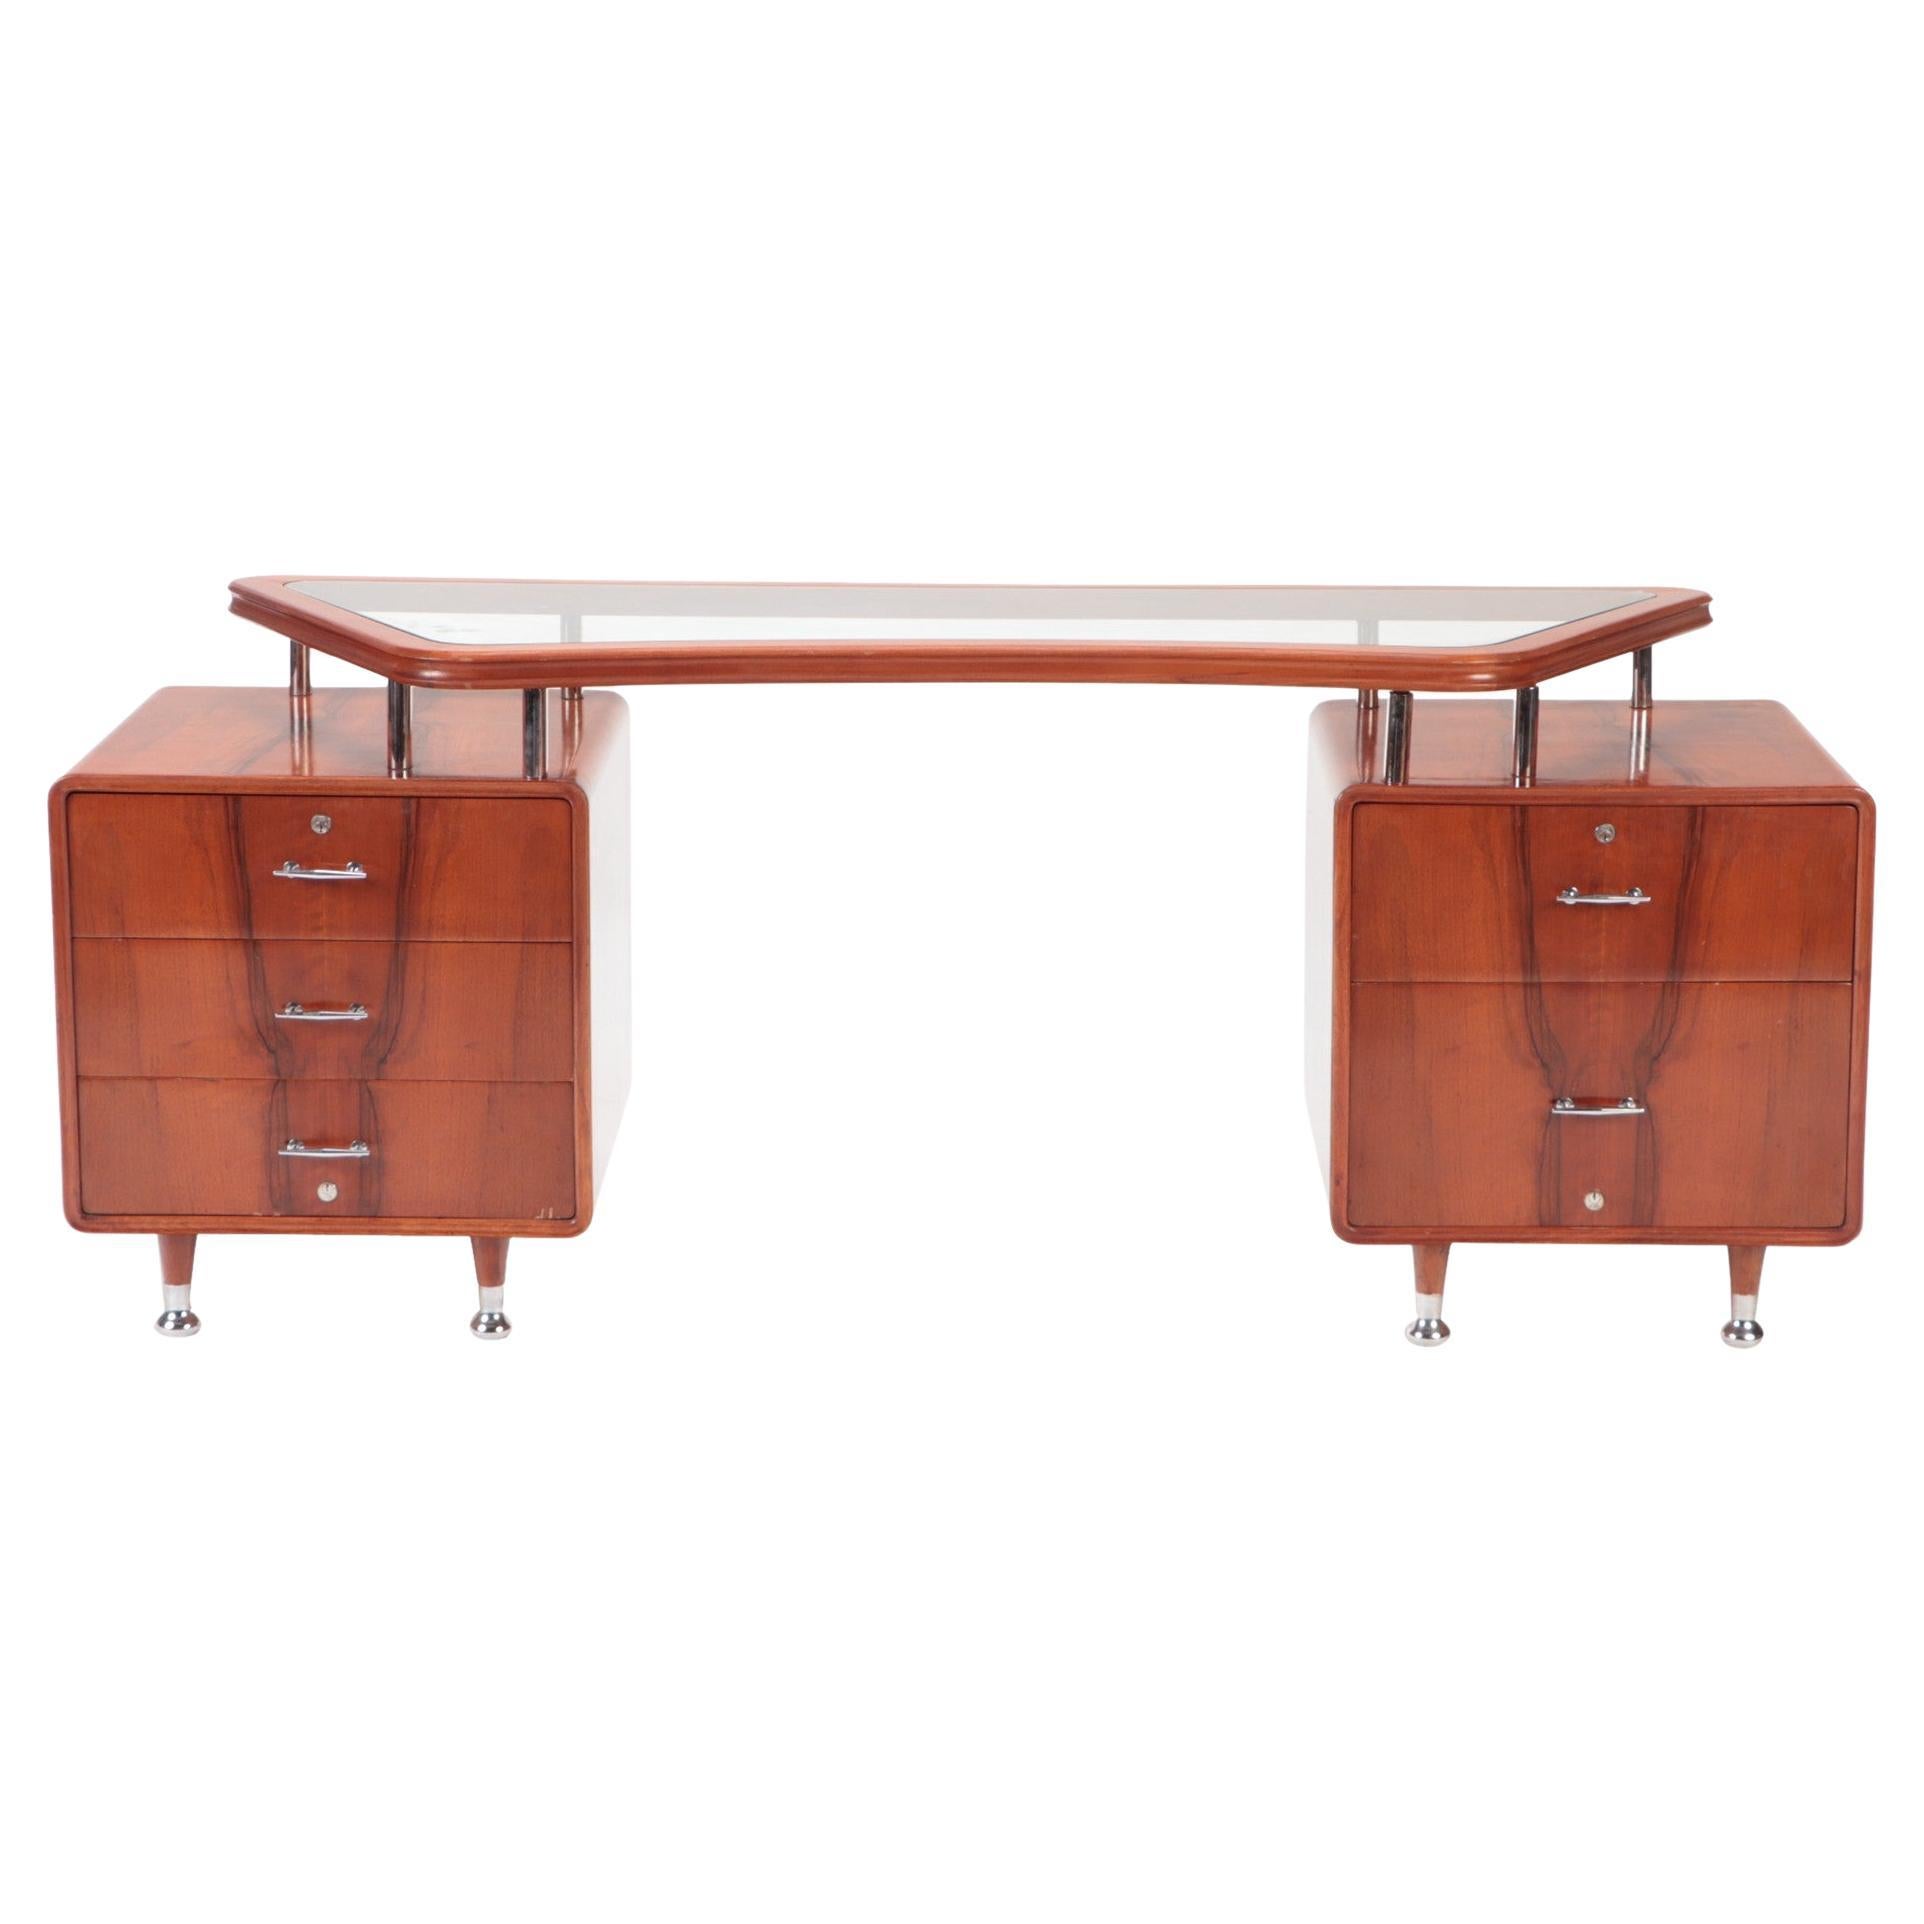 Double Pedestal Glass and Wood Desk with Chrome Mounts C 1960 For Sale